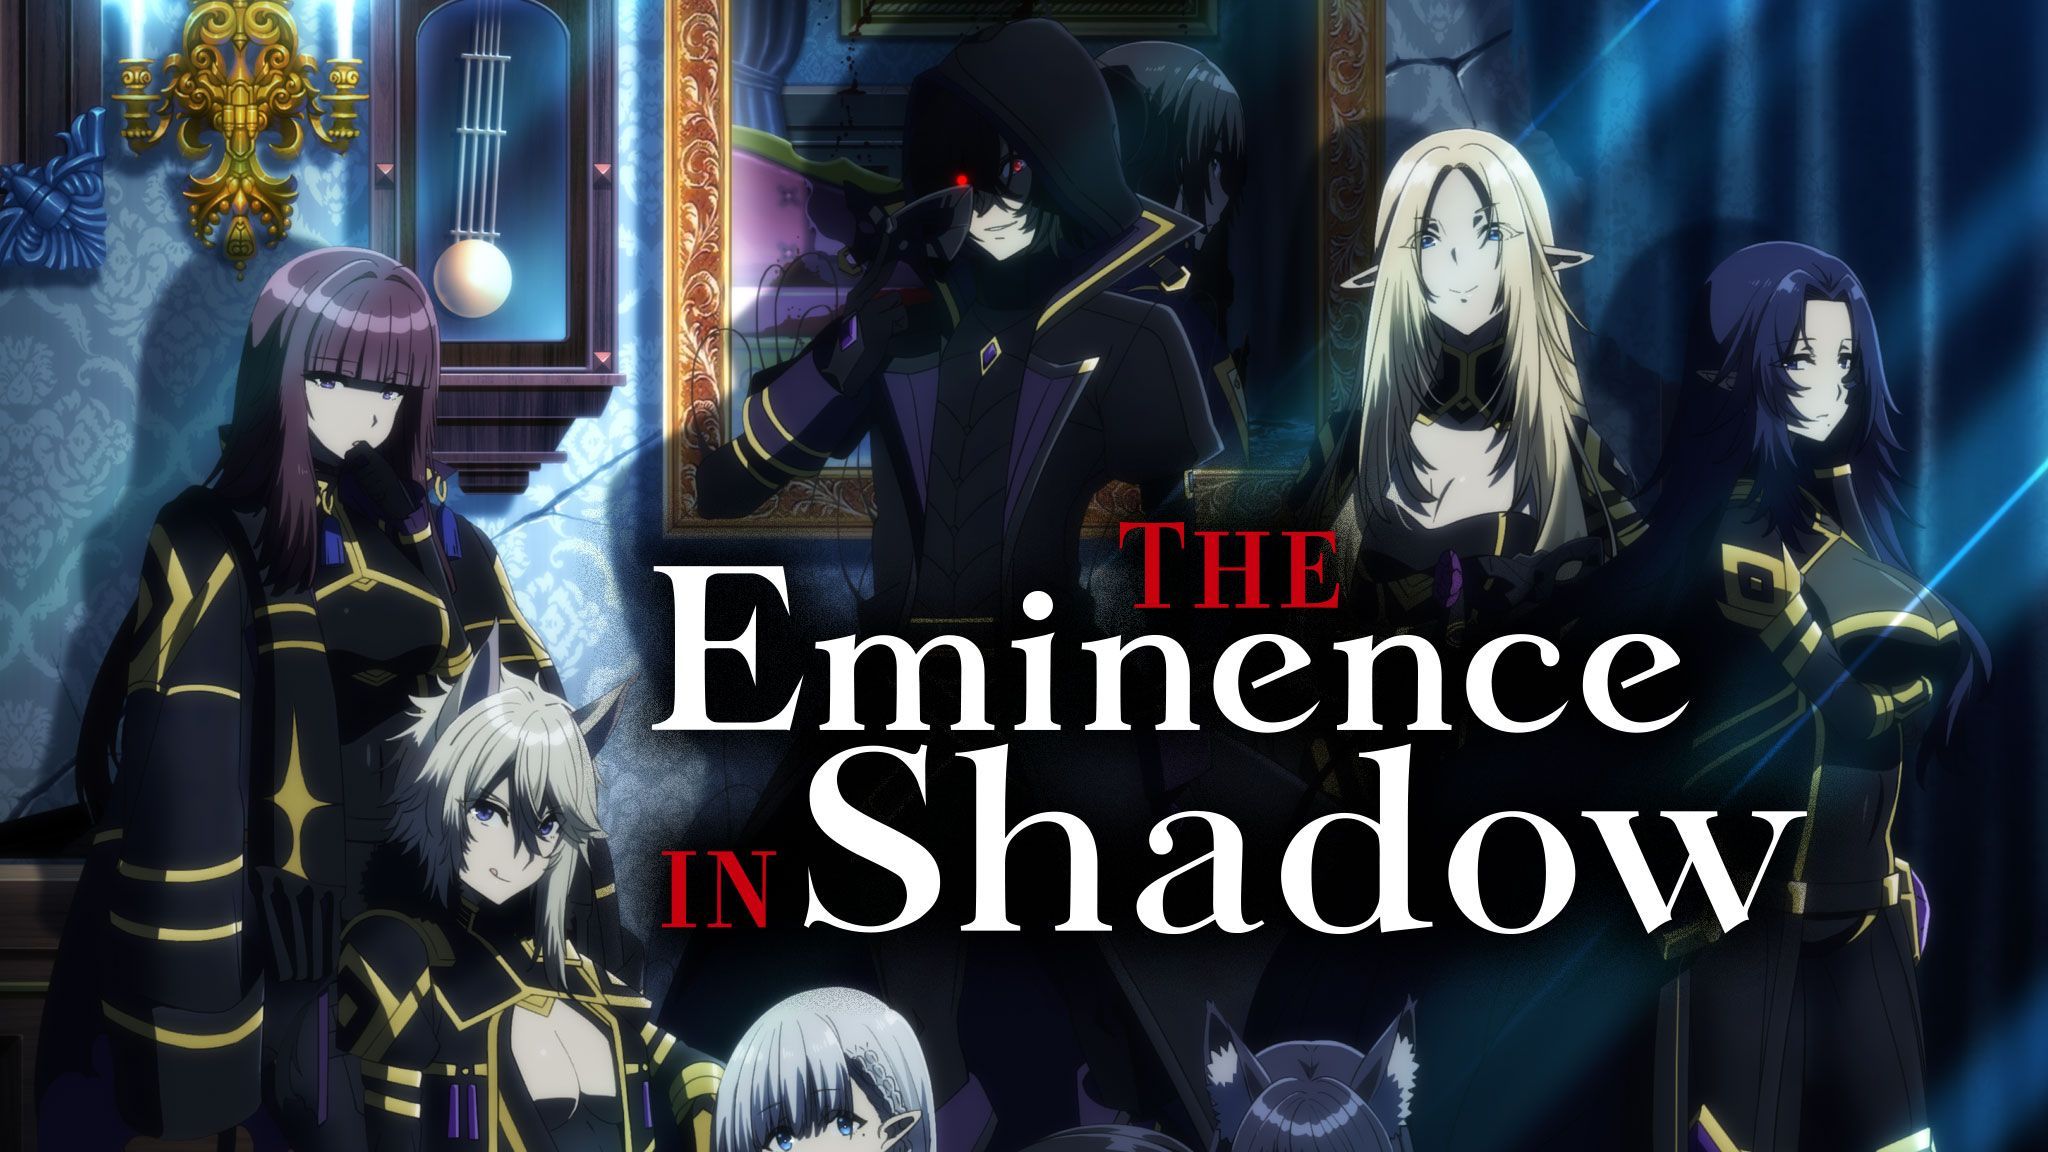 ep8[eng dub] eminence in shadow - video Dailymotion